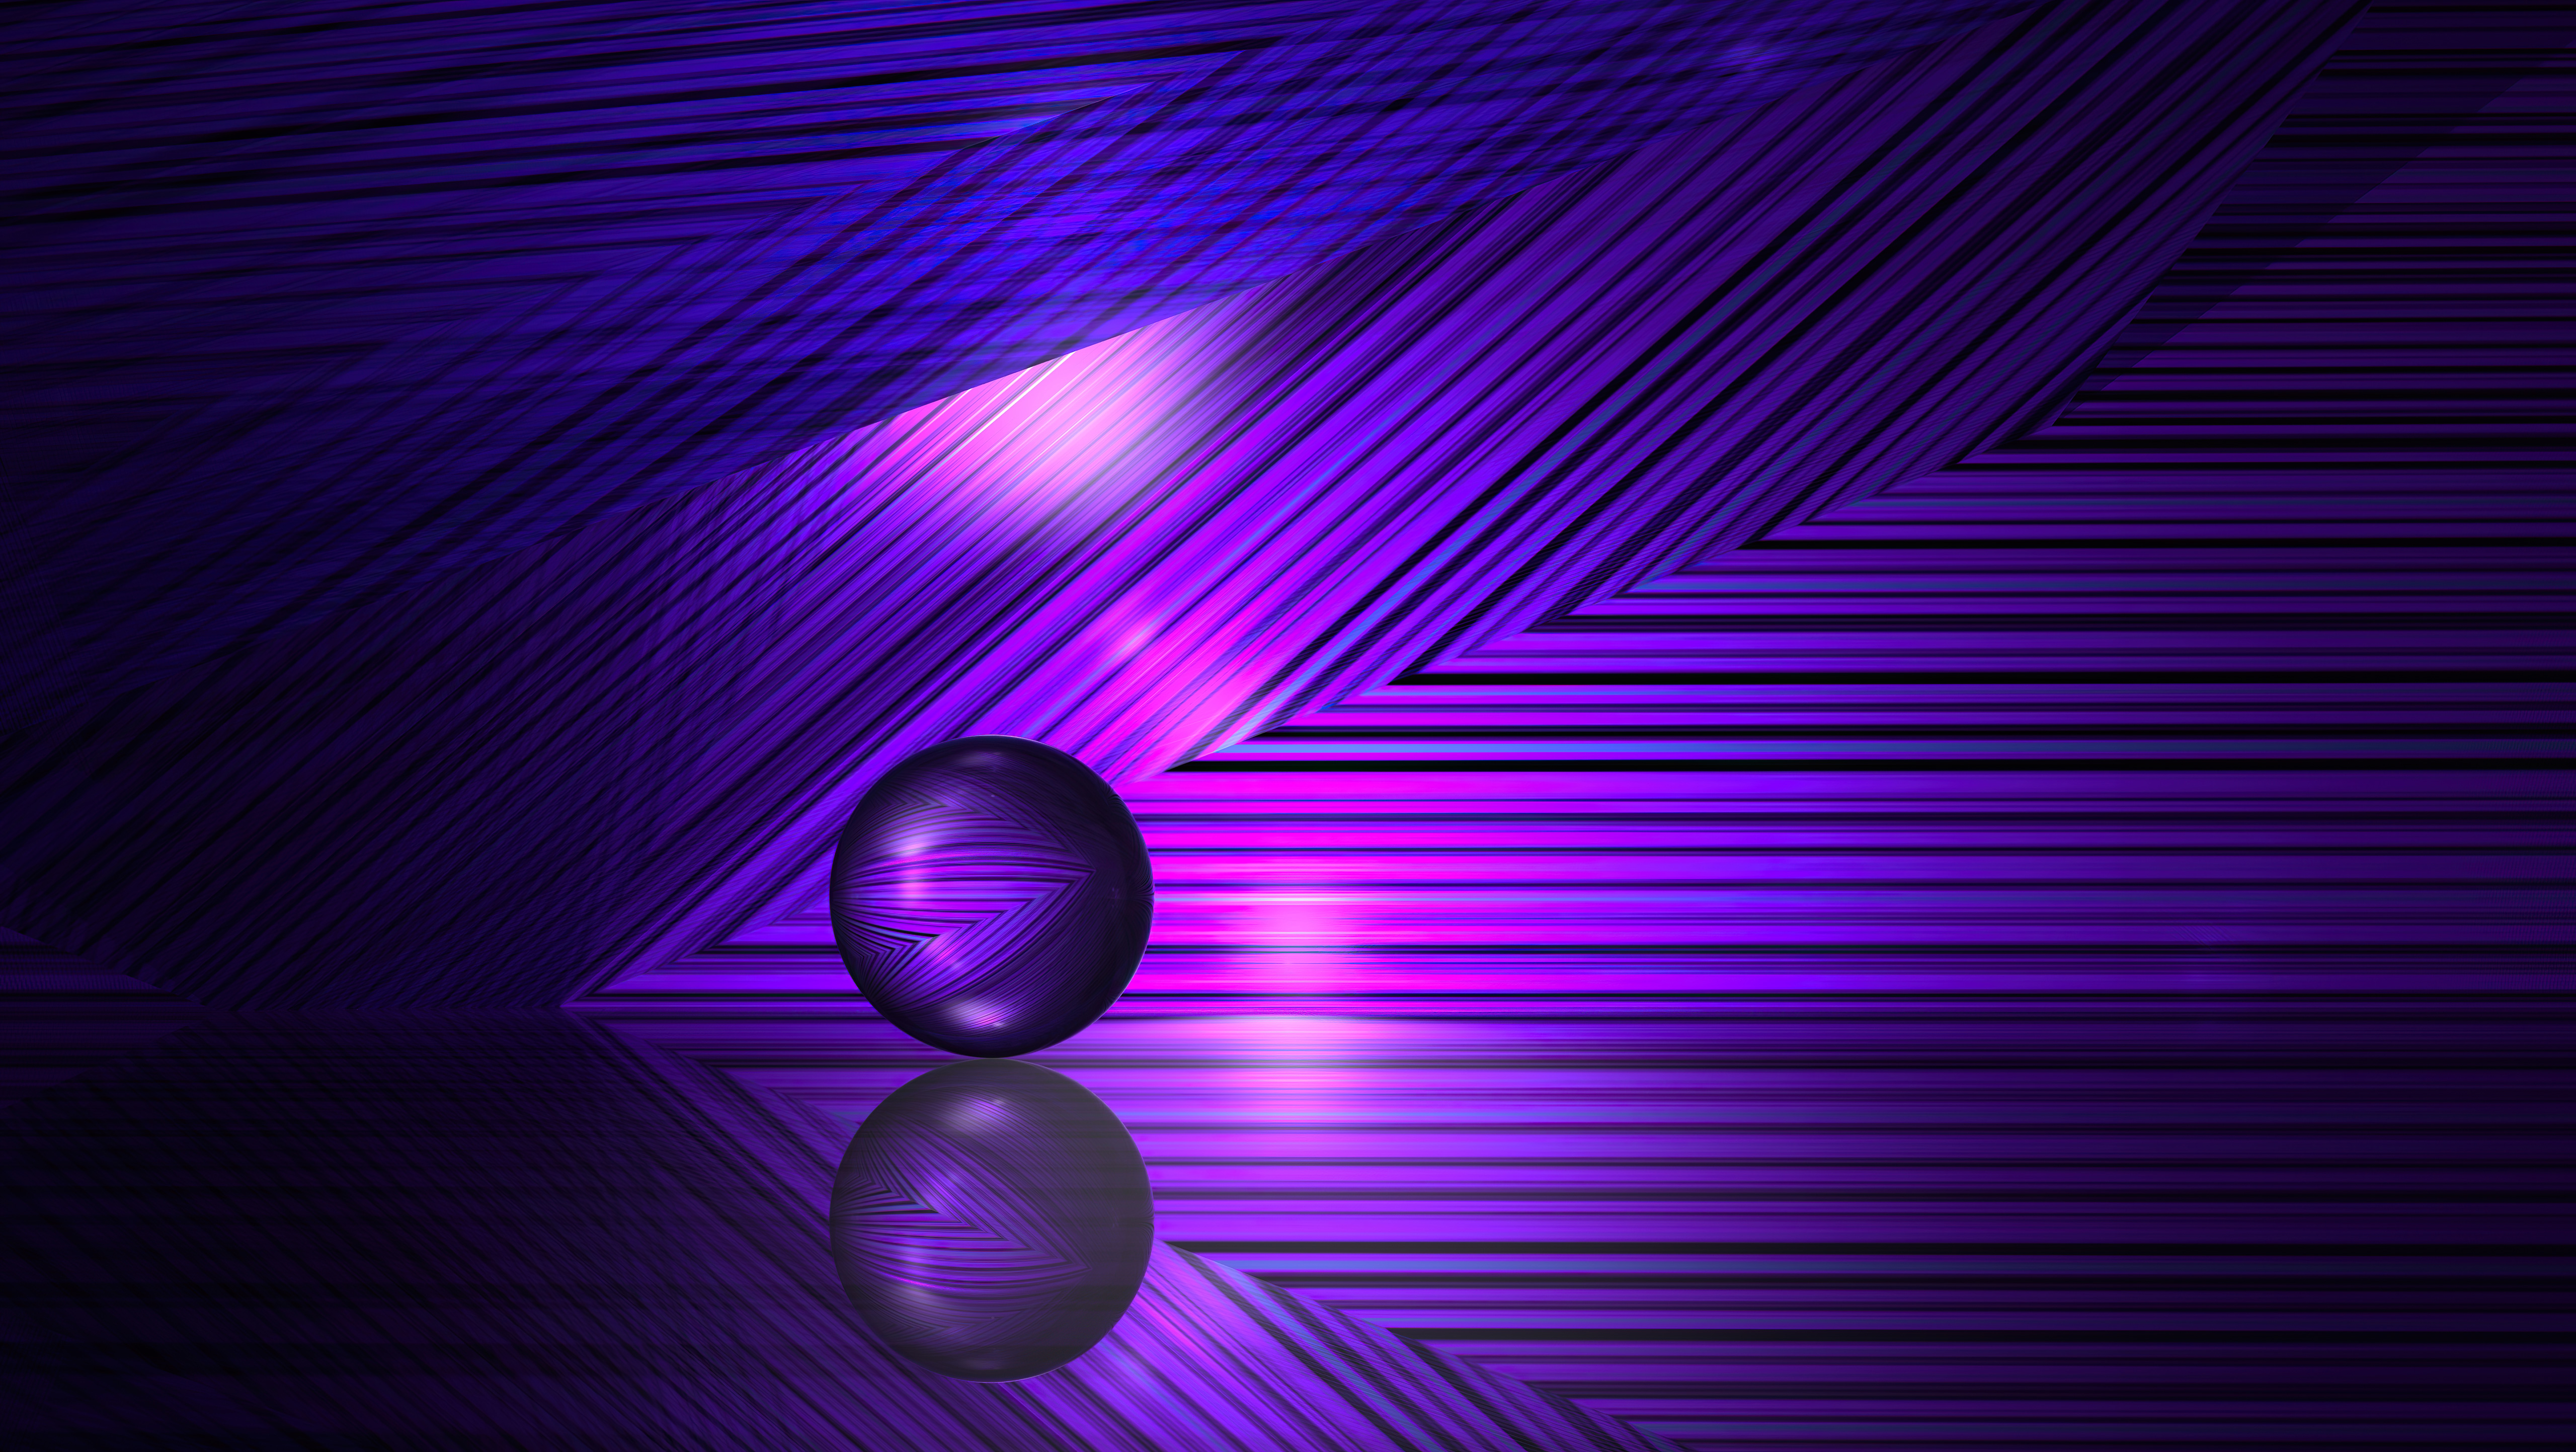 Wallpaper, purple, violet, Visual effect lighting, gas, electric blue, magenta, circle, pattern, symmetry, space, Tints and shades, graphics, font, electricity, ART, neon, ceiling, darkness, Transparent material, metal, graphic design, ball, fractal